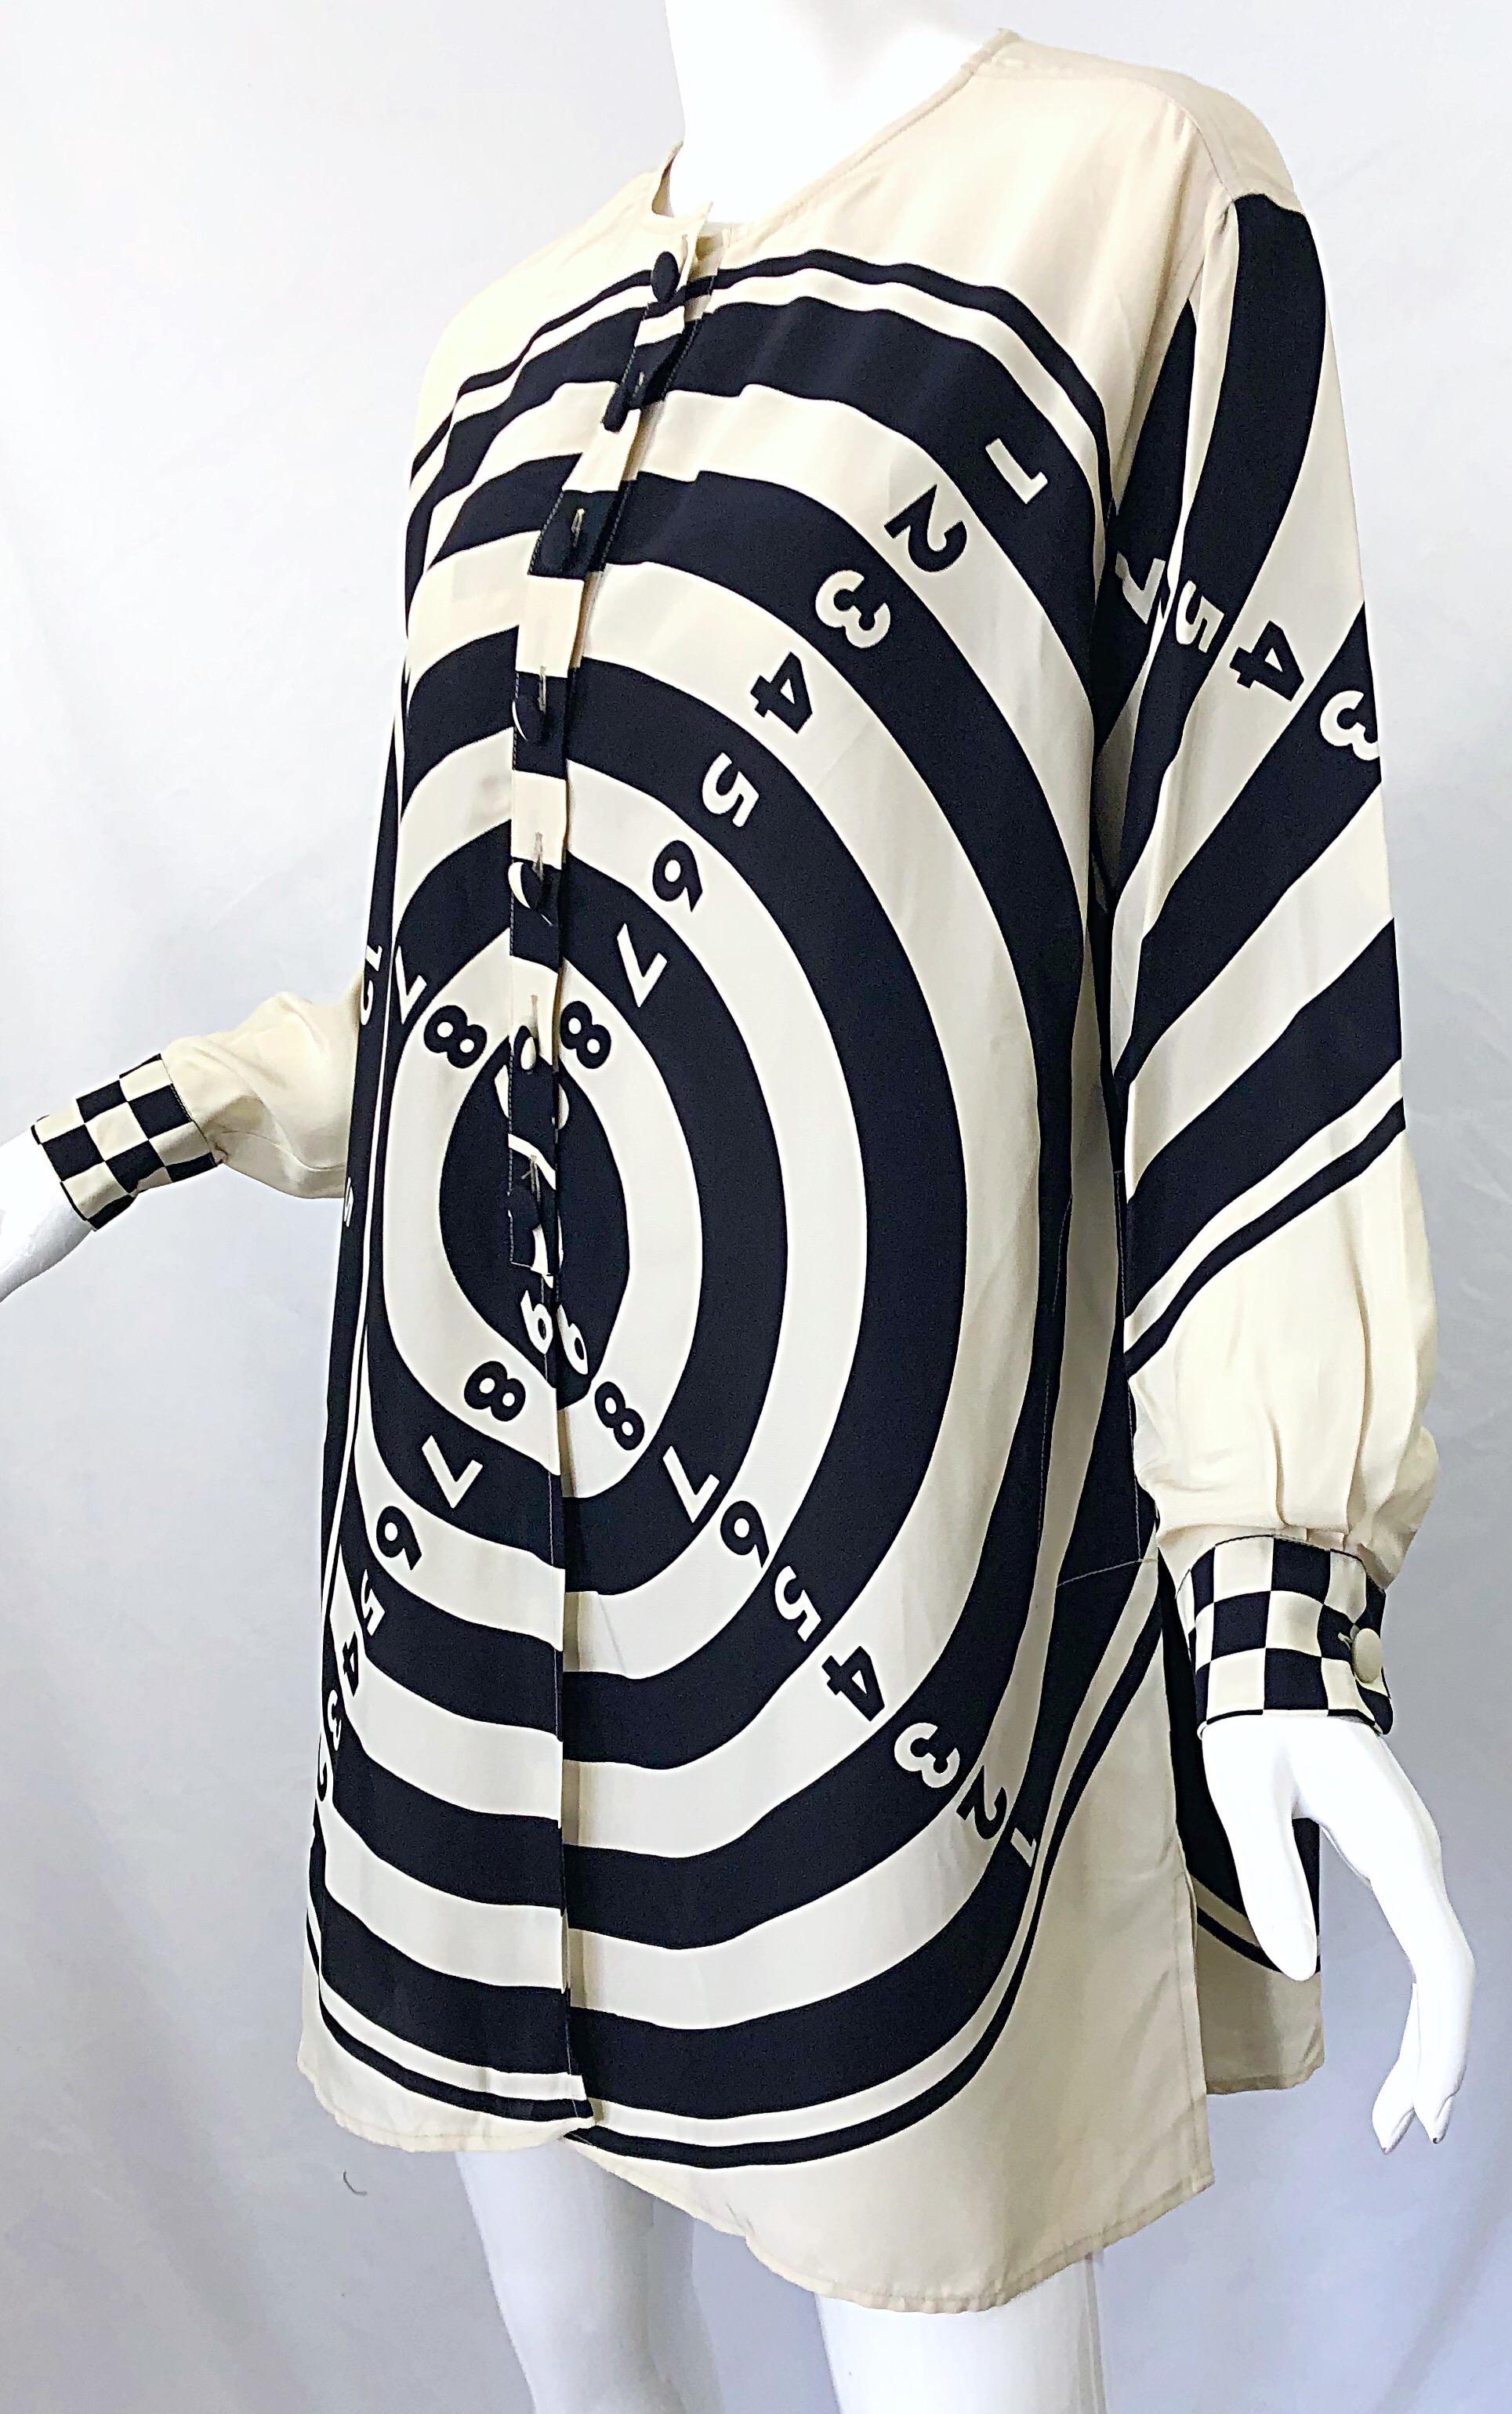 1980s Moschino Cheap & Chic Bullseye Black and White Size 8 Vintage Tunic Dress For Sale 5